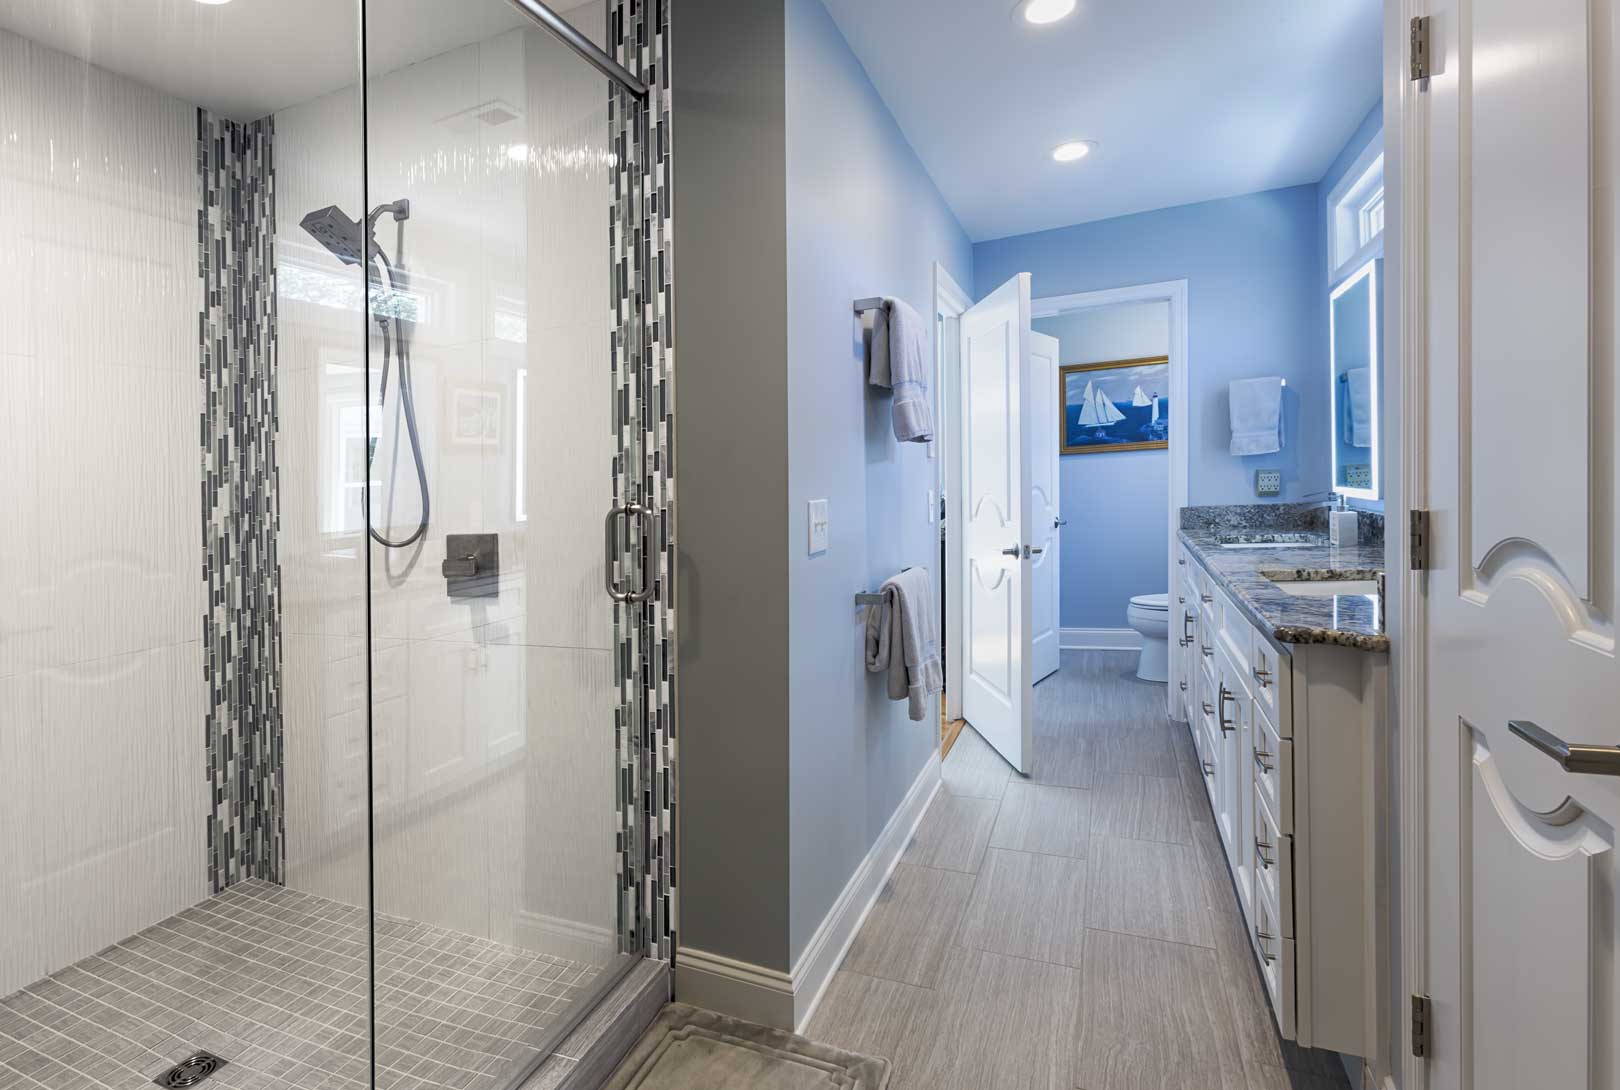 A remodeled master bathroom with blue gray walls, and gray and white tile at a home